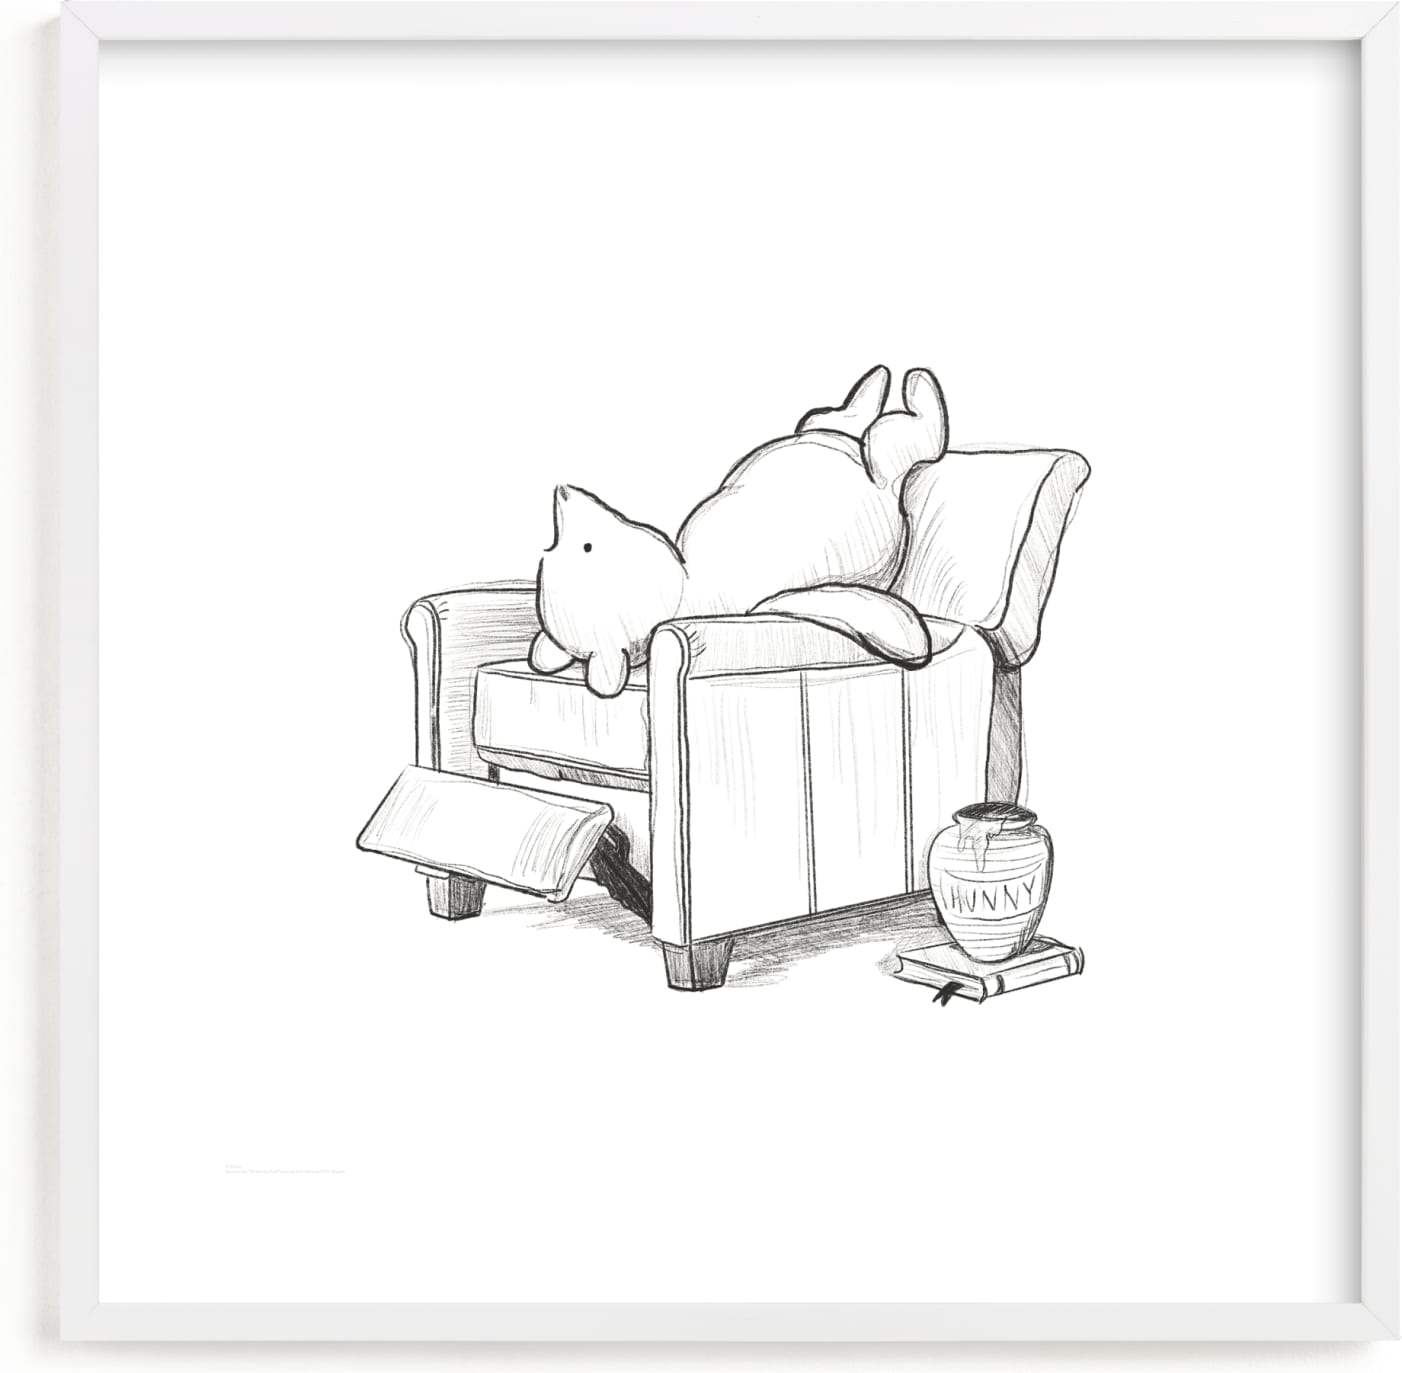 This is a black and white disney art by Stefanie Lane called Pooh Lounging from Disney's Winnie The Pooh.